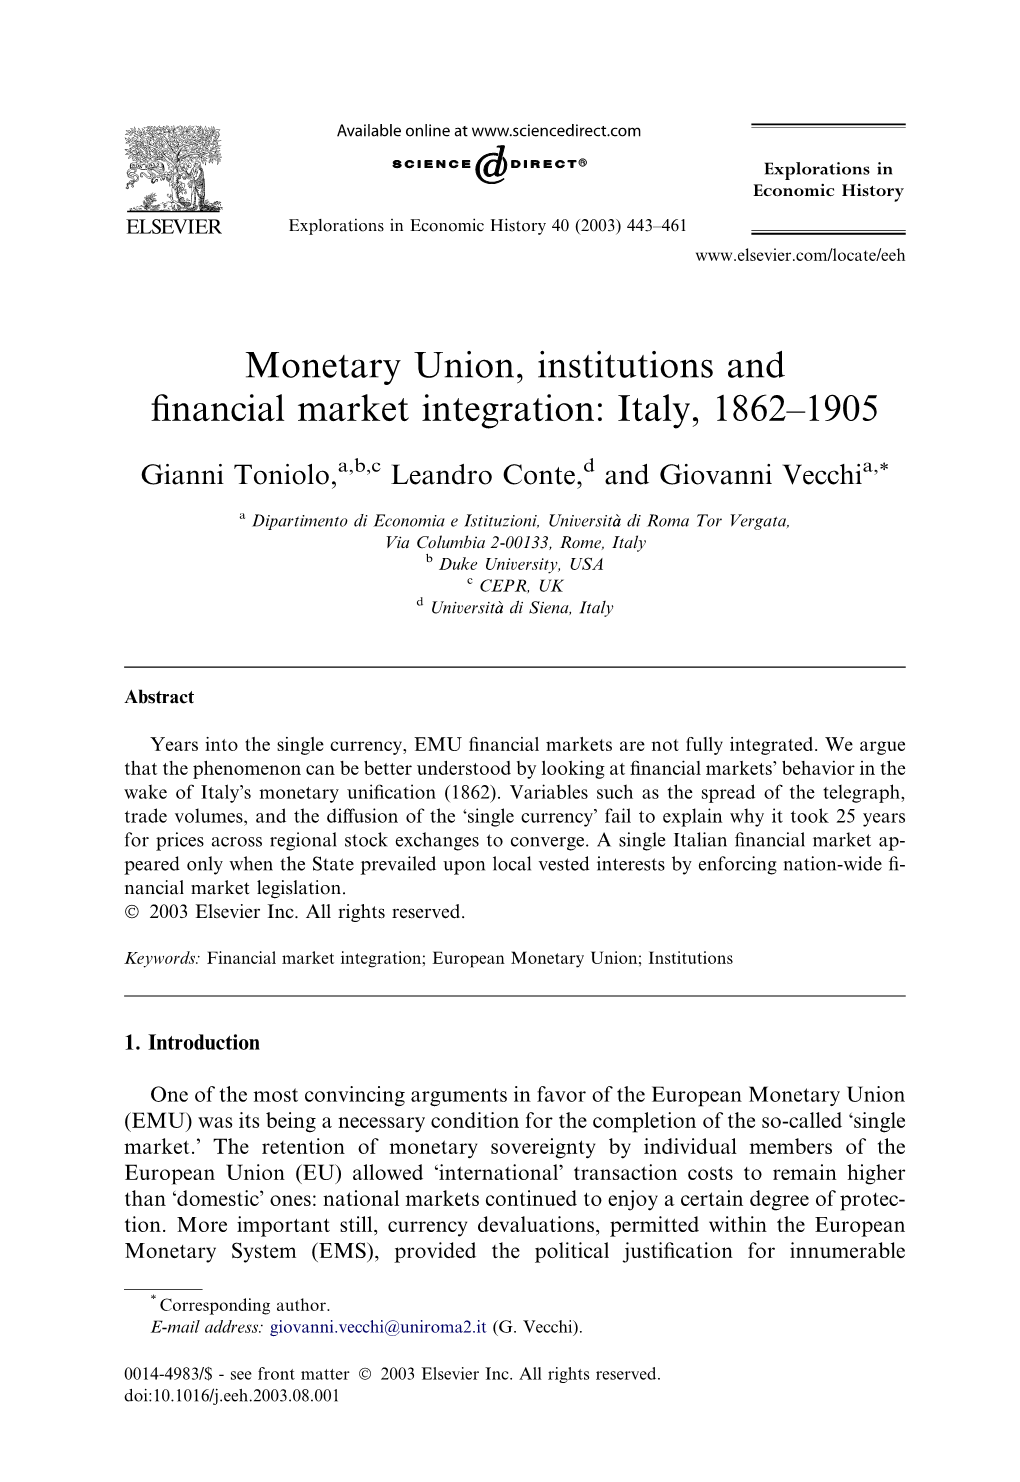 Monetary Union, Institutions and Financial Market Integration: Italy